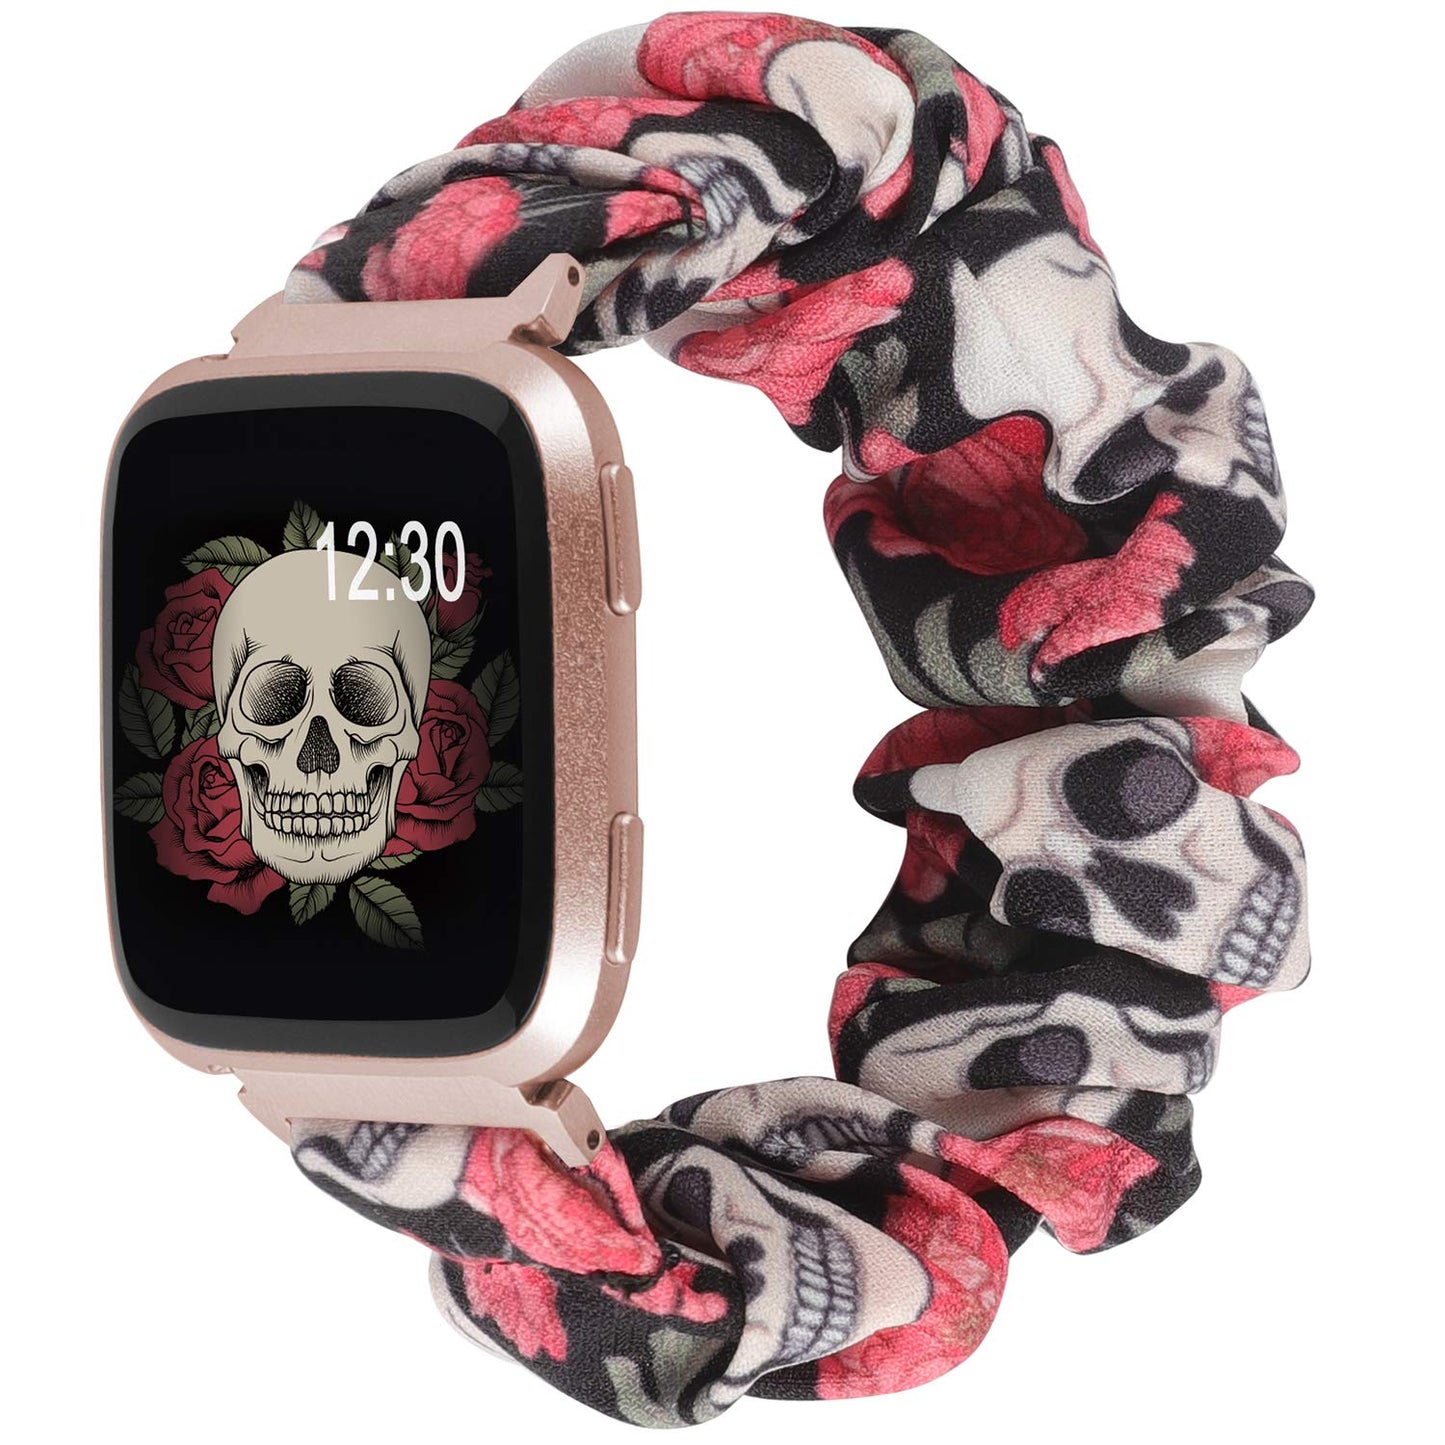 TOYOUTHS Scrunchie Bands Compatible with Fitbit Versa/Versa 2/Versa Lite Special Edition Women Girl Elastic Stretch Fabric Strap Pattern Printed Scrunchy Replacement Bracelet Wristband Accessories